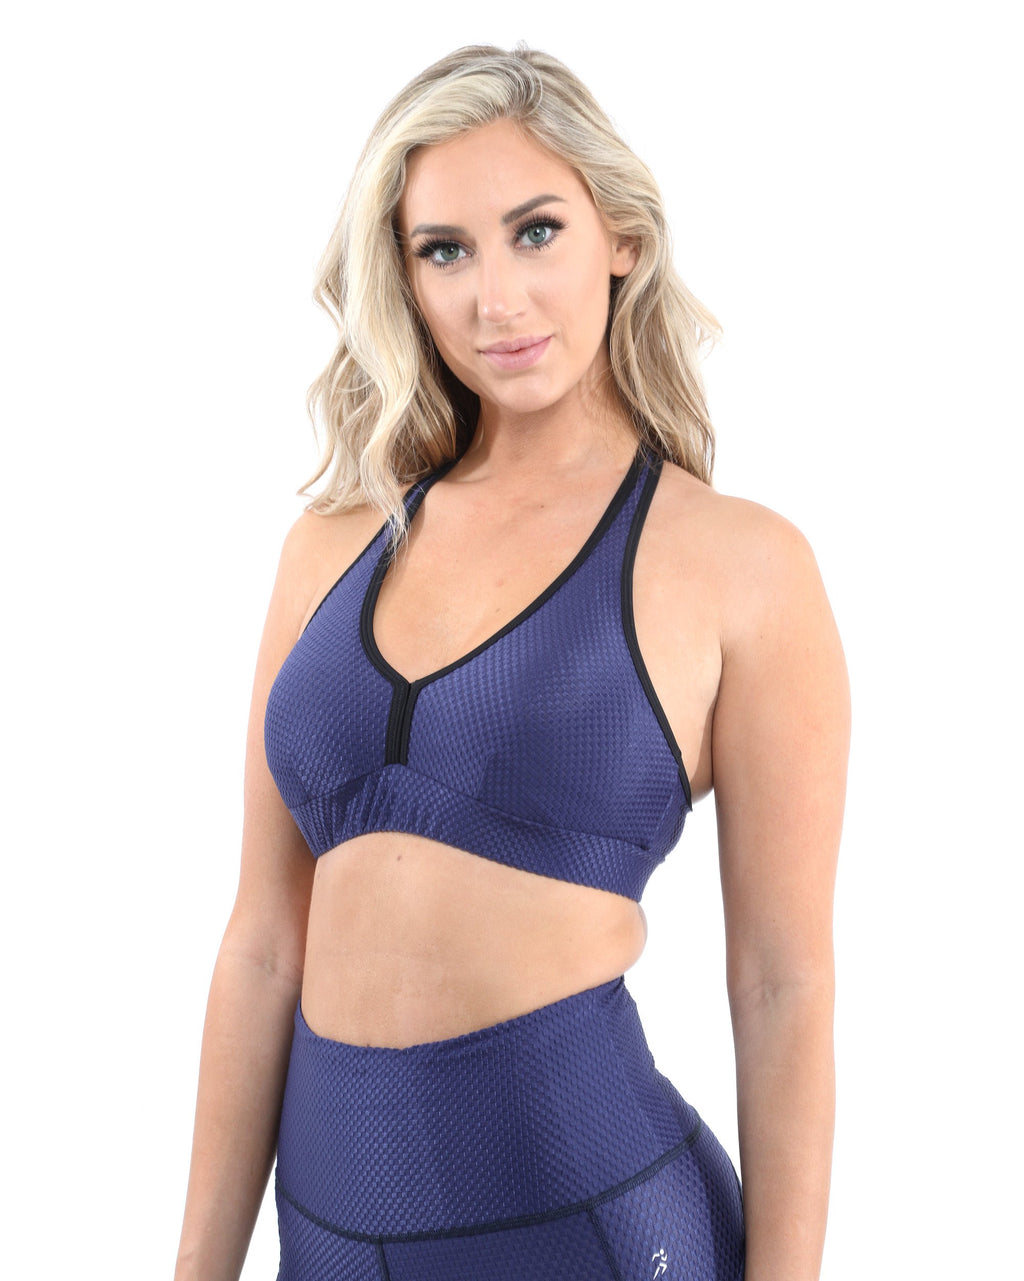 SALE! 50% OFF! Venice Activewear Sports Bra - Navy [MADE IN ITALY]